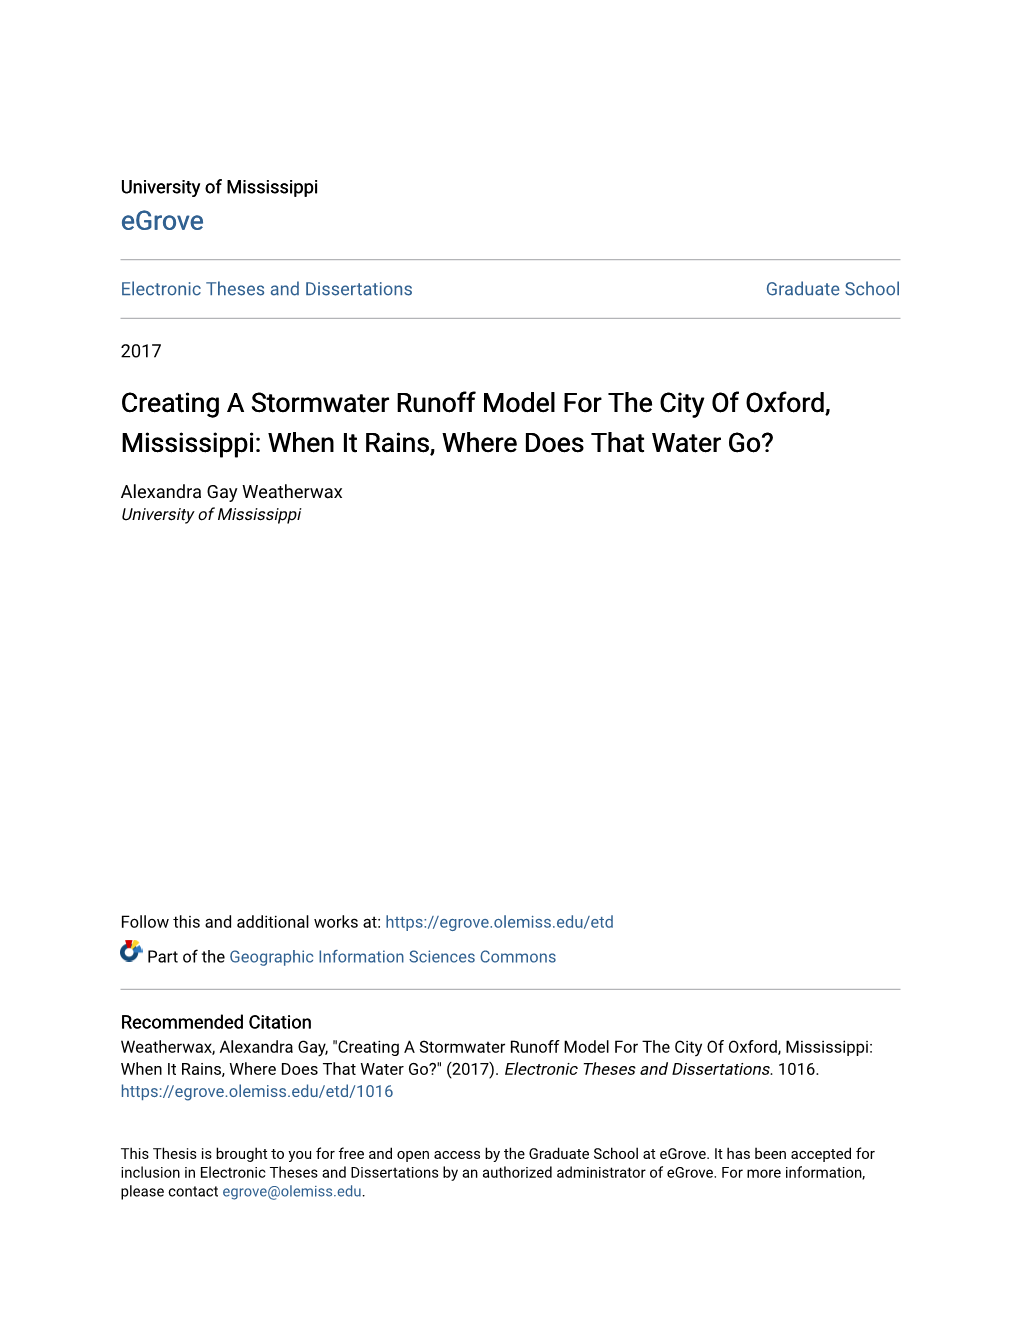 Creating a Stormwater Runoff Model for the City of Oxford, Mississippi: When It Rains, Where Does That Water Go?